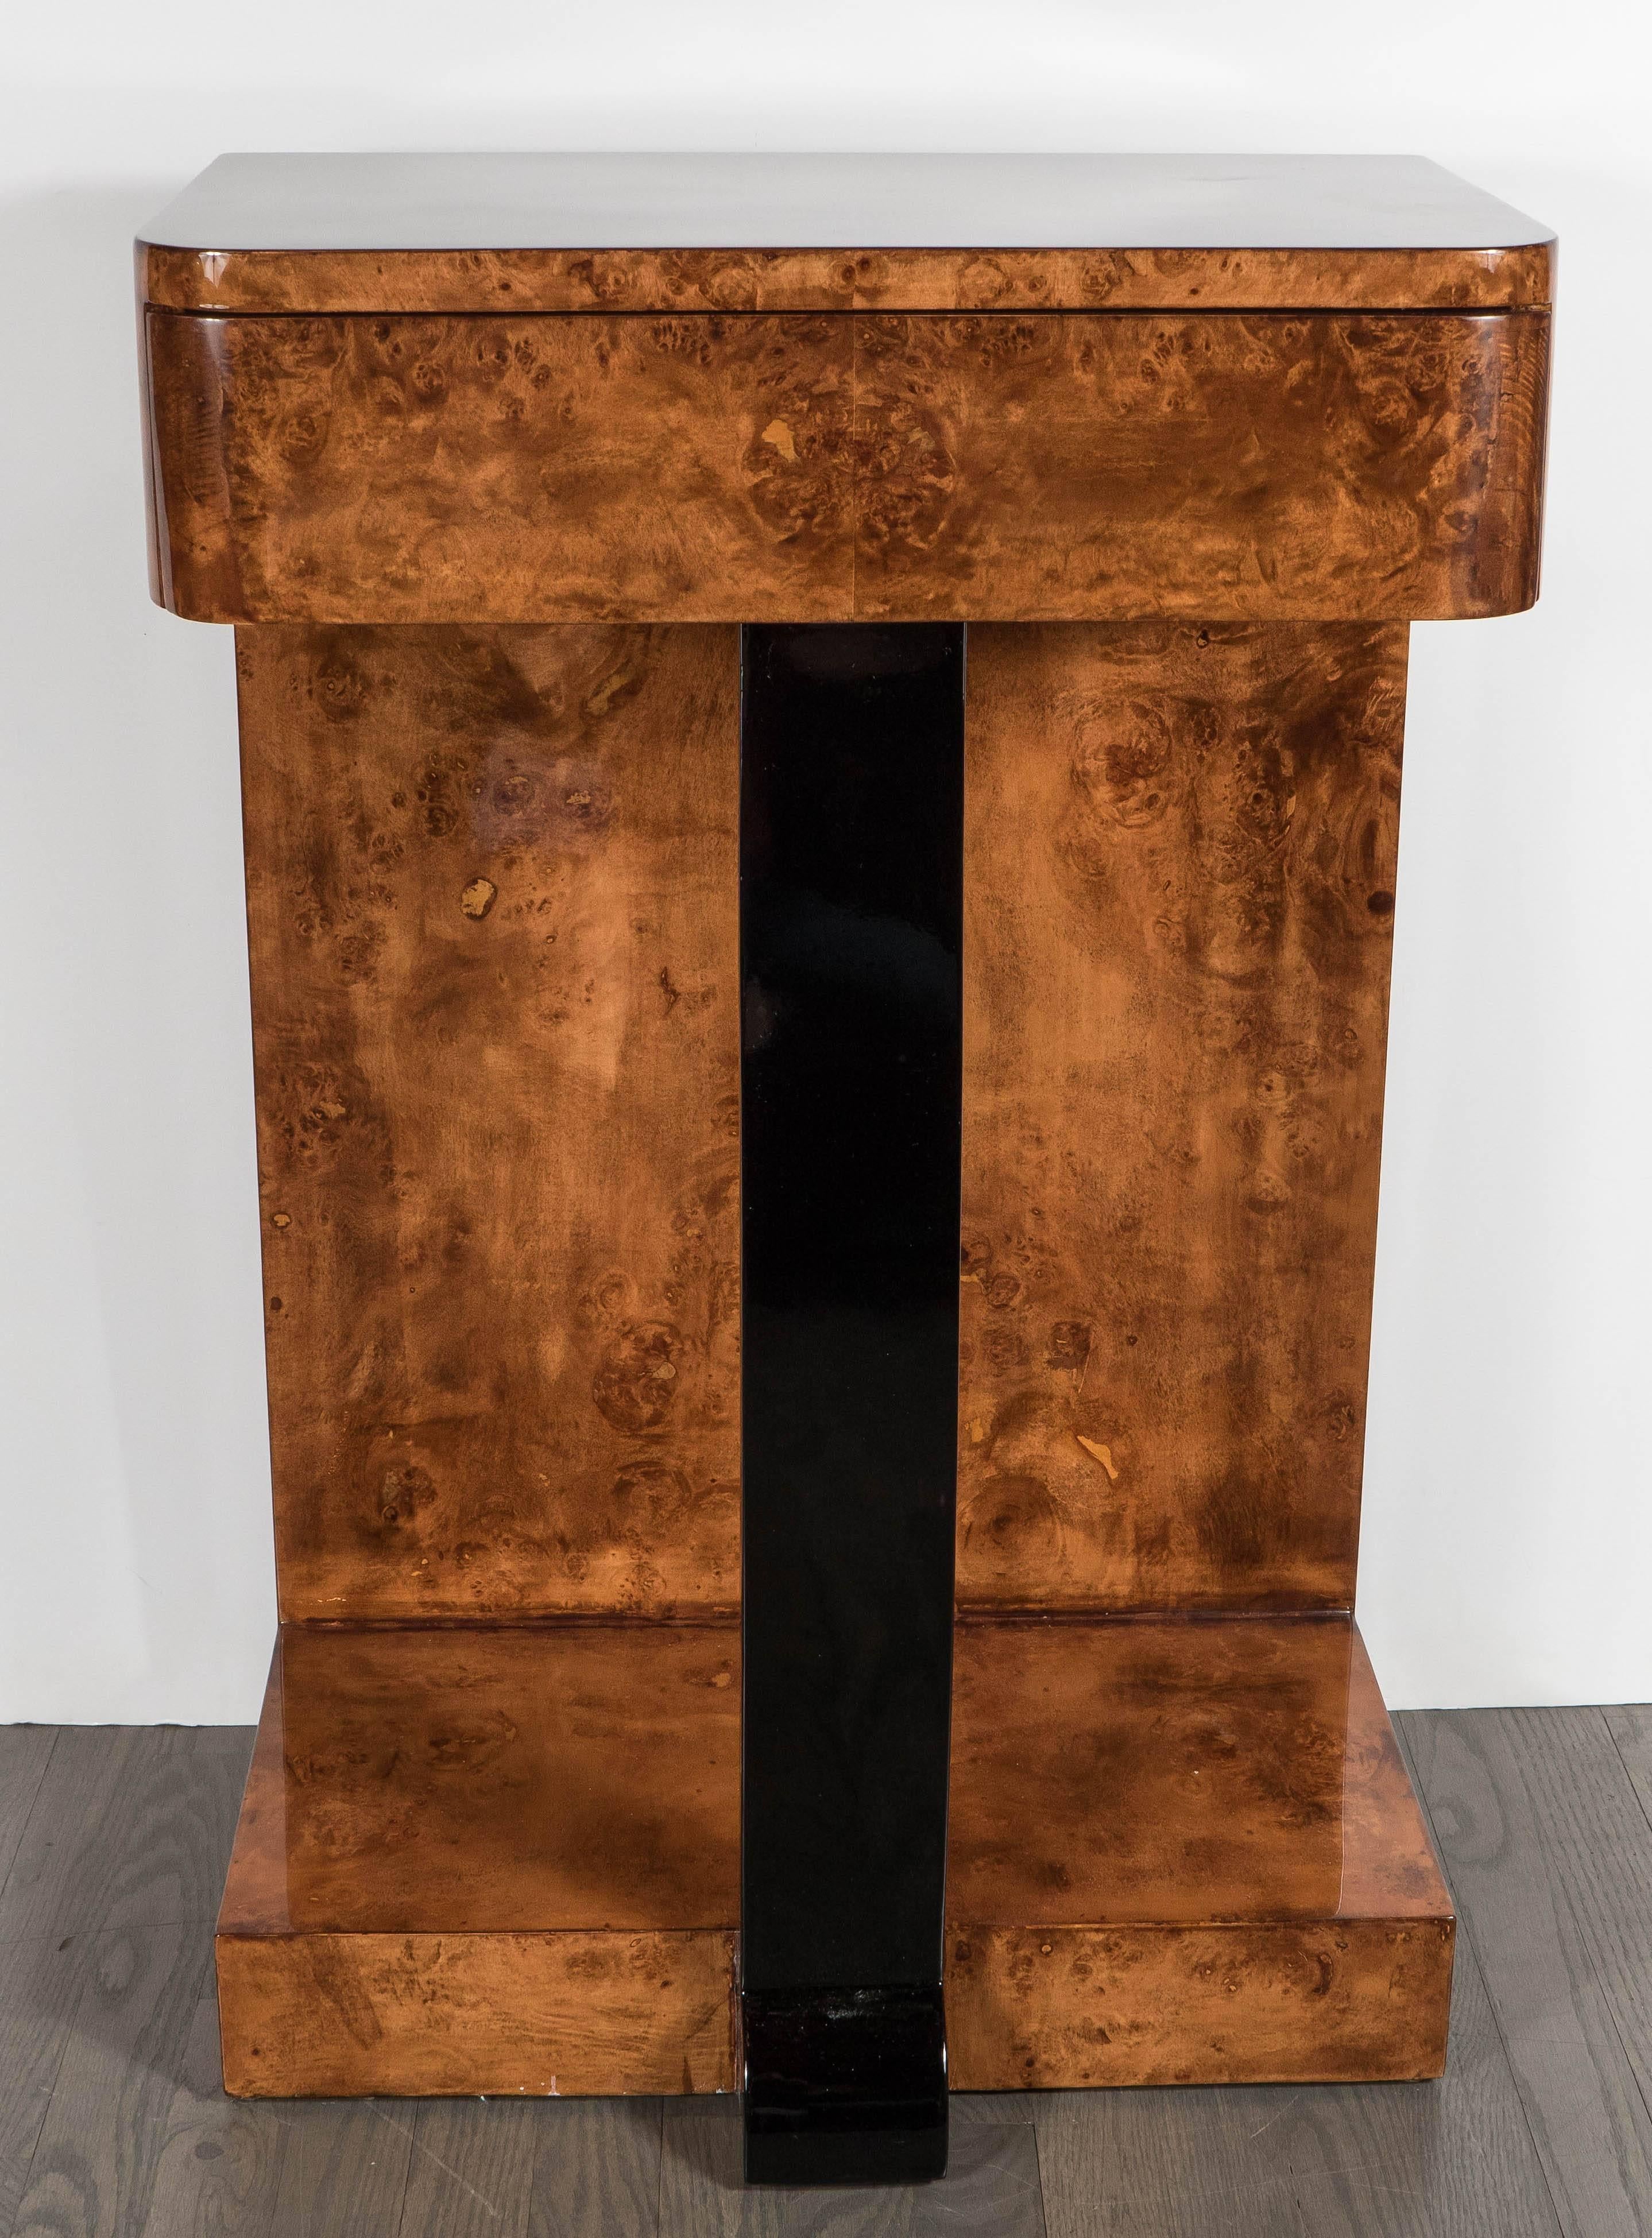 This piece features a generous pull-out drawer and bowed-front, black-lacquered center support and exotic bookmatched burled elm detailing all around. Streamlined design with machine age inspiration. This sized piece would lend well alongside a